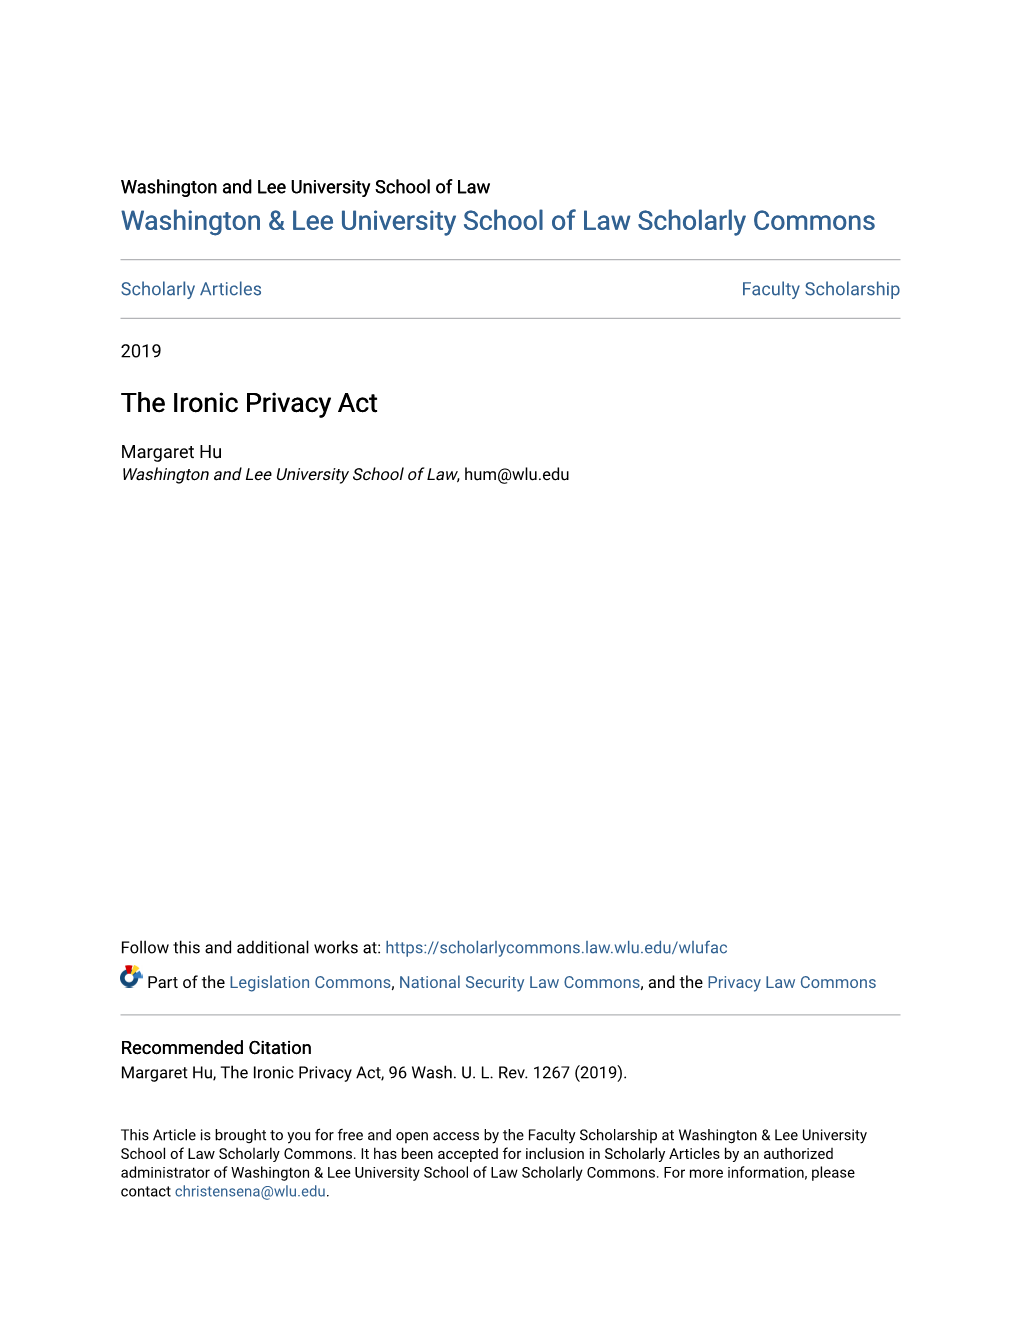 The Ironic Privacy Act